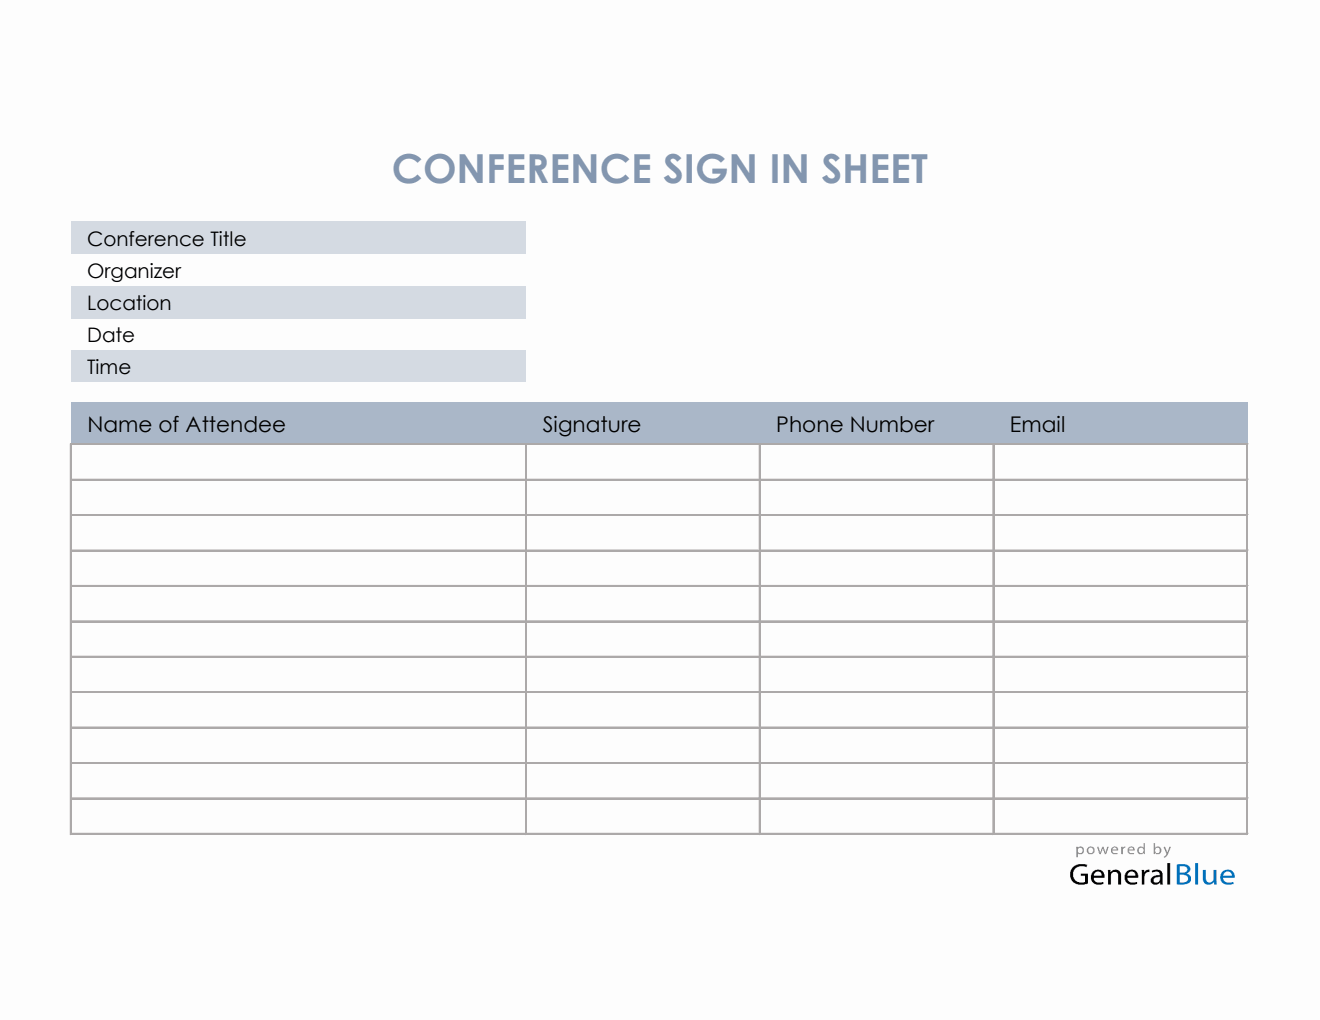 Conference Sign In Sheet in Excel